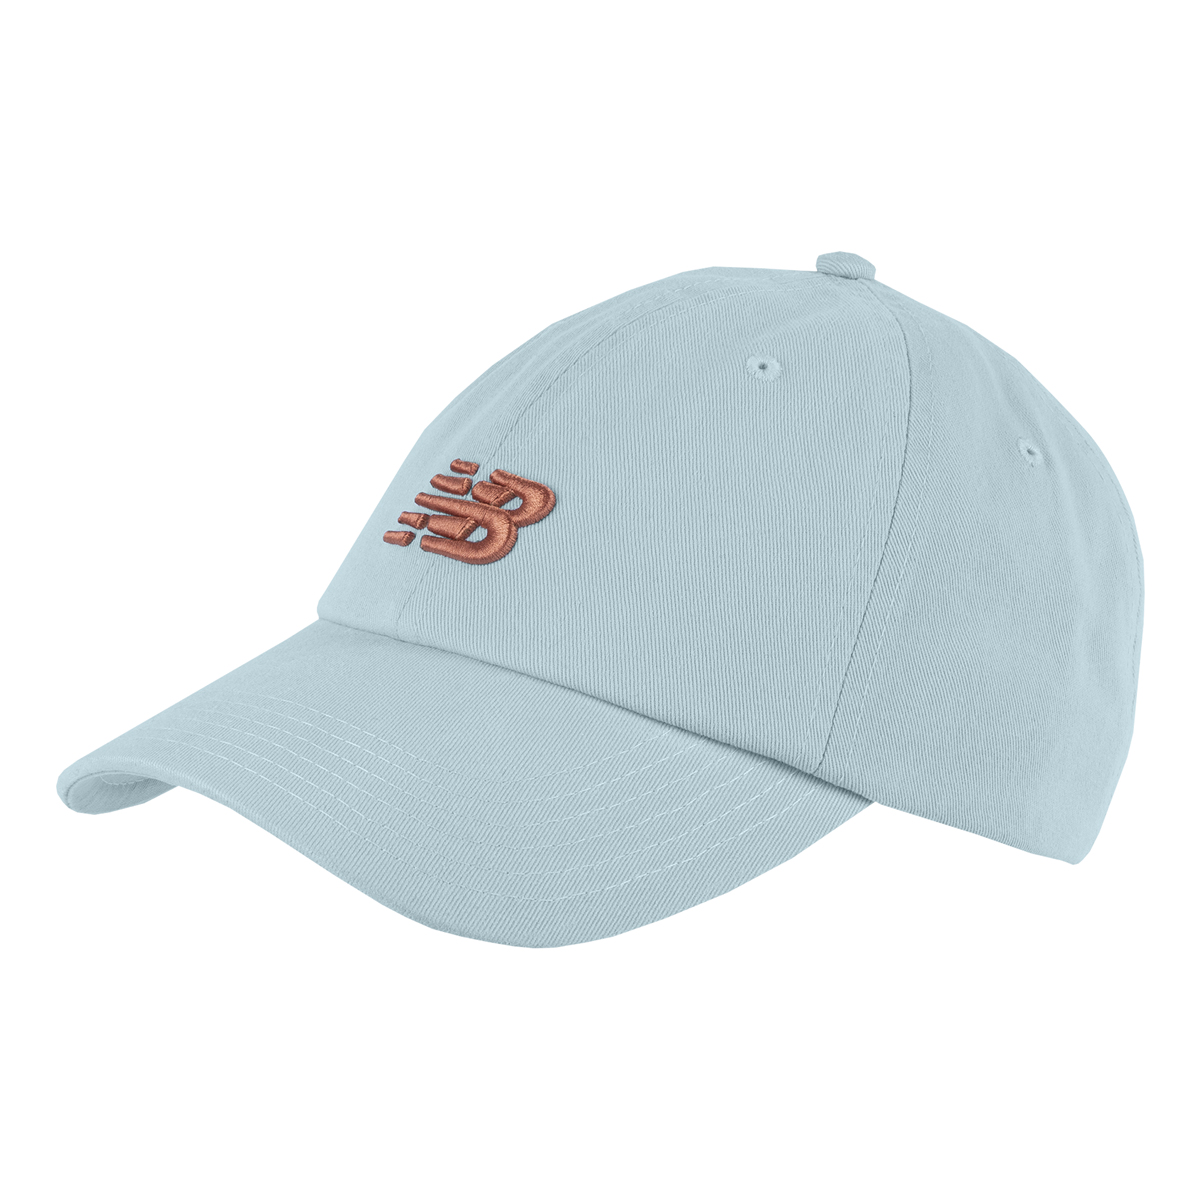 Classic Curved Strapback - Washed Blue